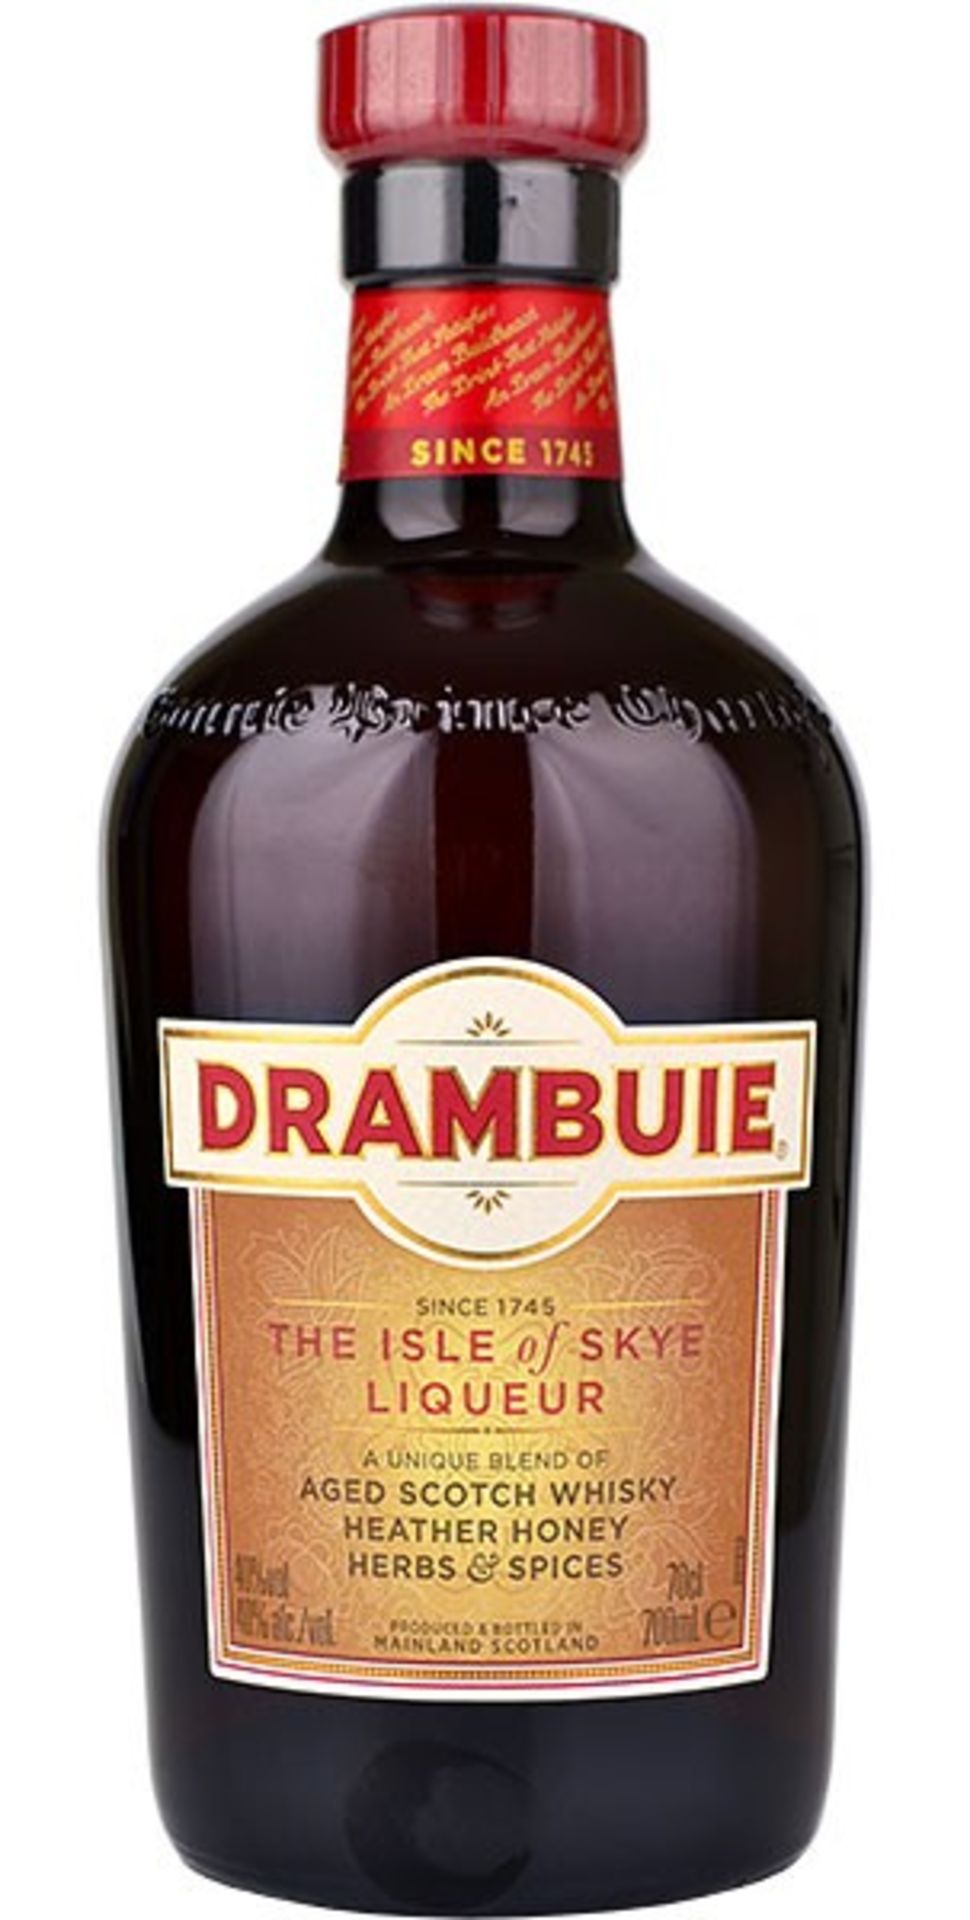 10x 70cl Bottles of Drambuie Whisky Liqueur, new